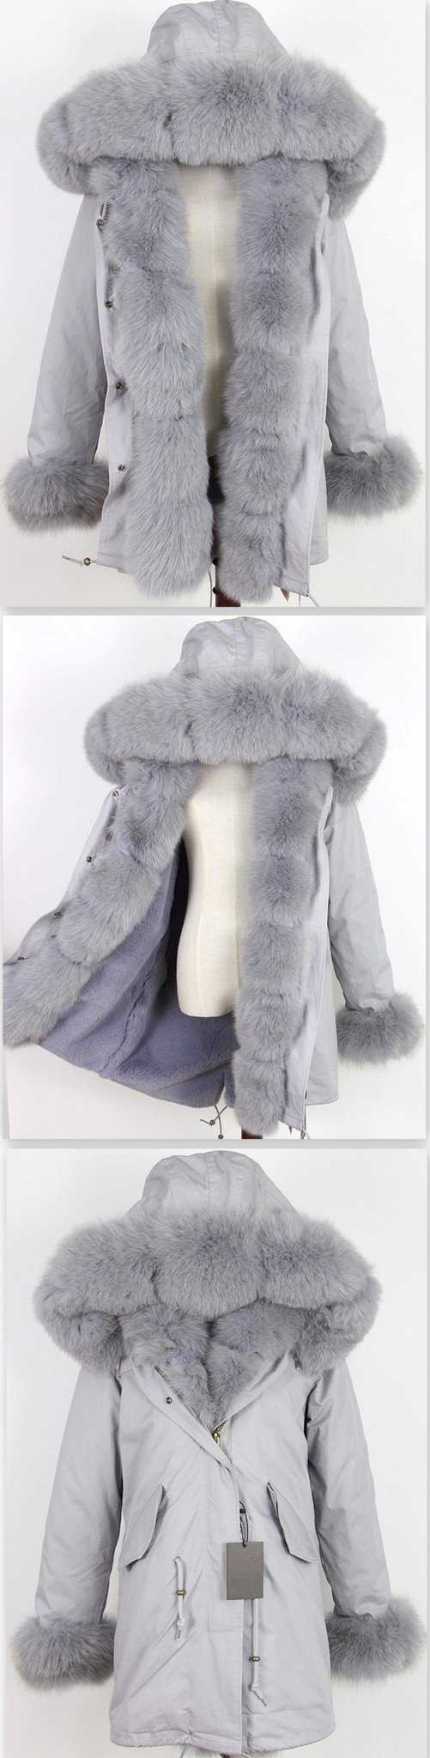 Army Parka Military Parka Coat with Fox Fur-Grey | DESIGNER INSPIRED FASHIONS